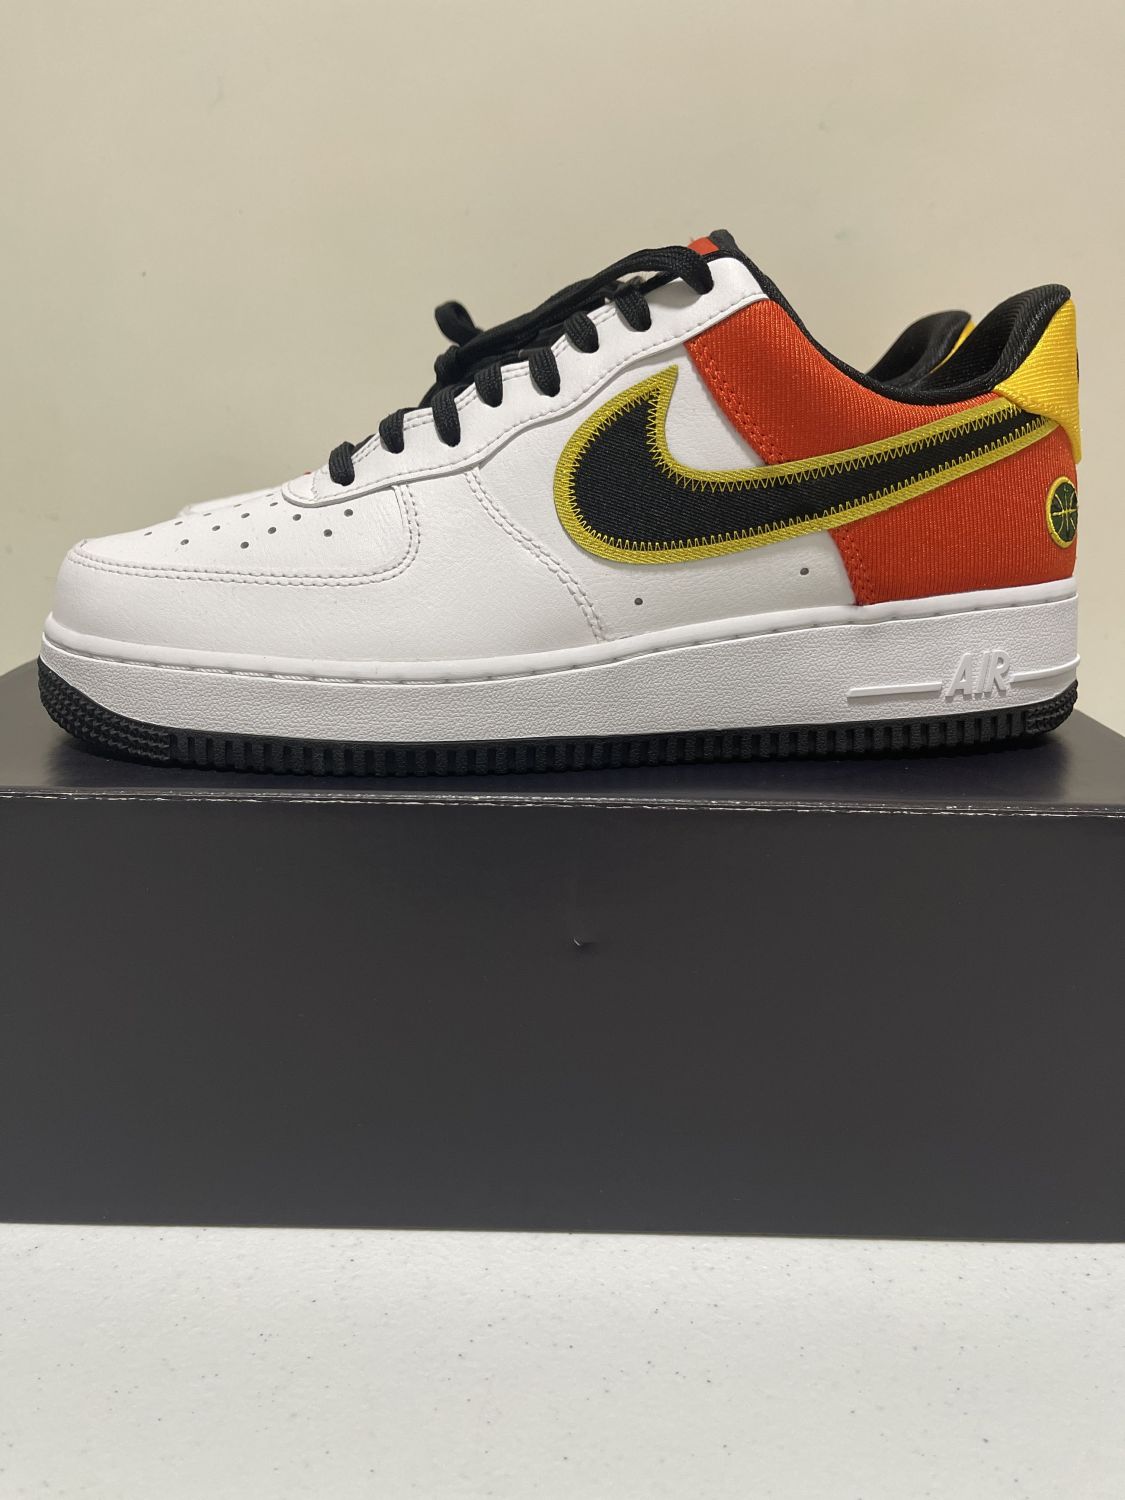  Nike Mens Air Force 1 Low CU8070 100 Rayguns - Size 7.5